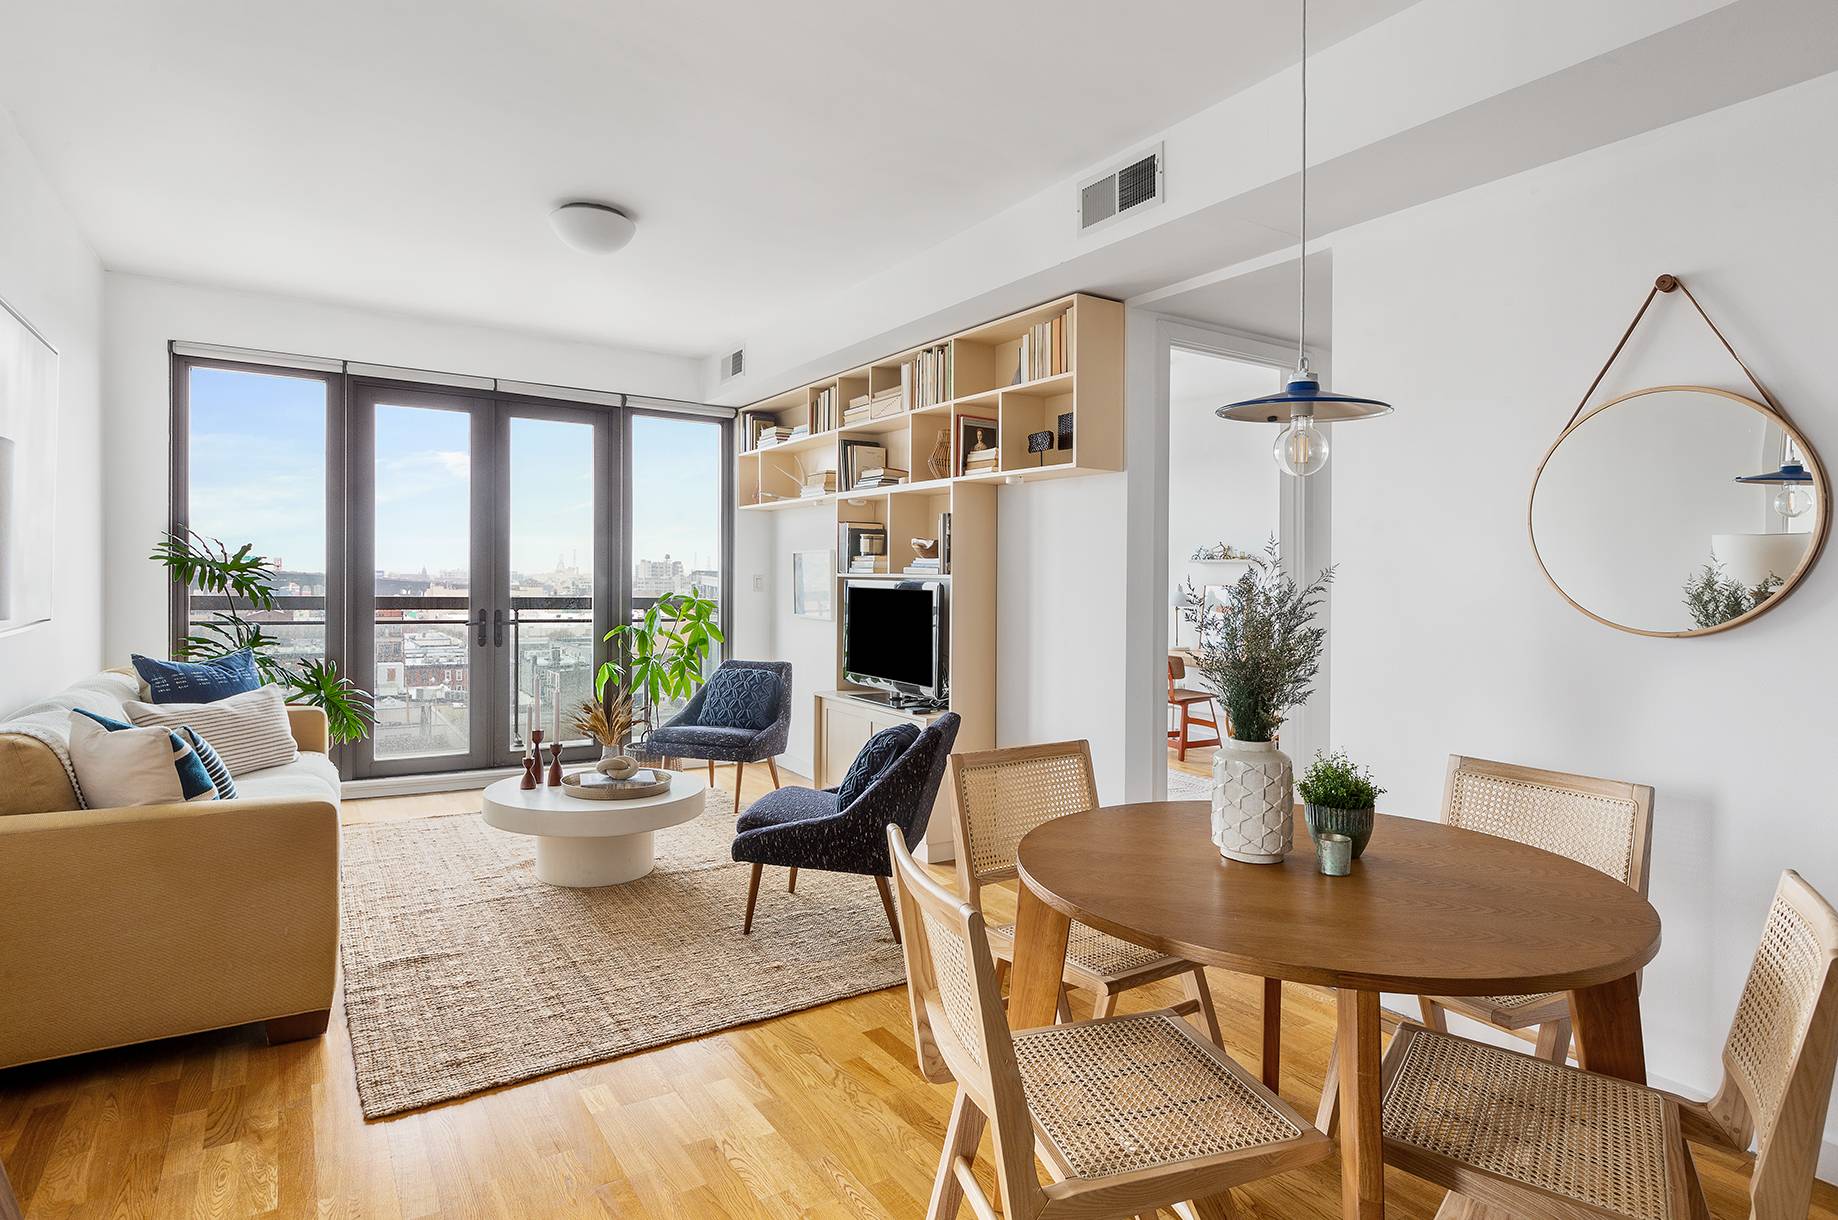 Welcome to 500 4th Avenue, 8L, a 2BR 2BA condo with private outdoor space in one of Park Slope's only full service buildings !